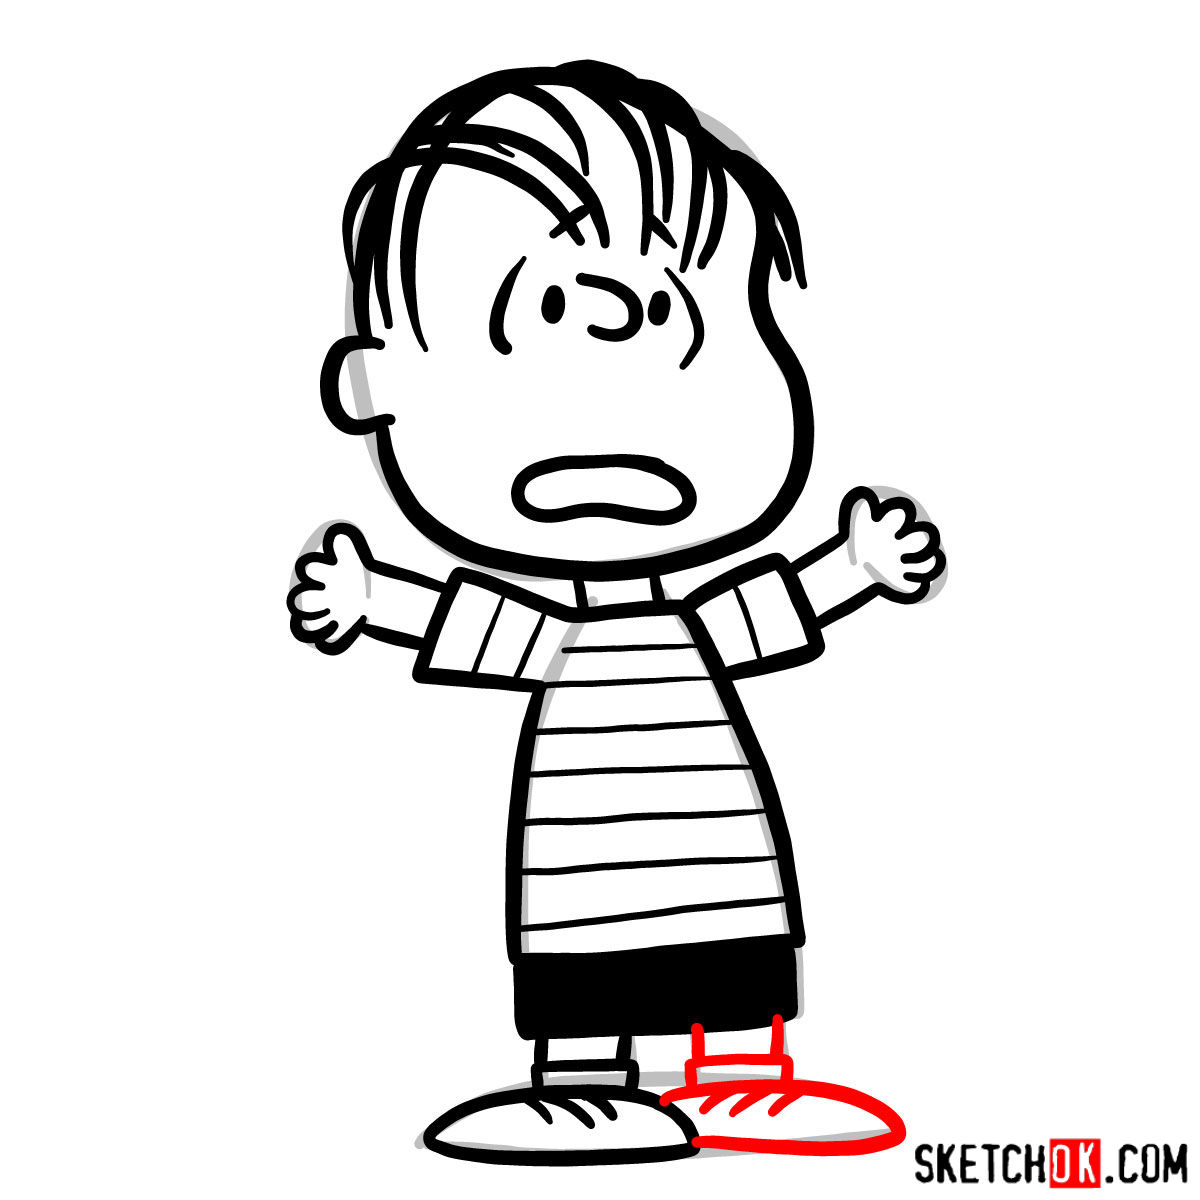 Dive into Doodles How to Draw Linus Van Pelt from Peanuts